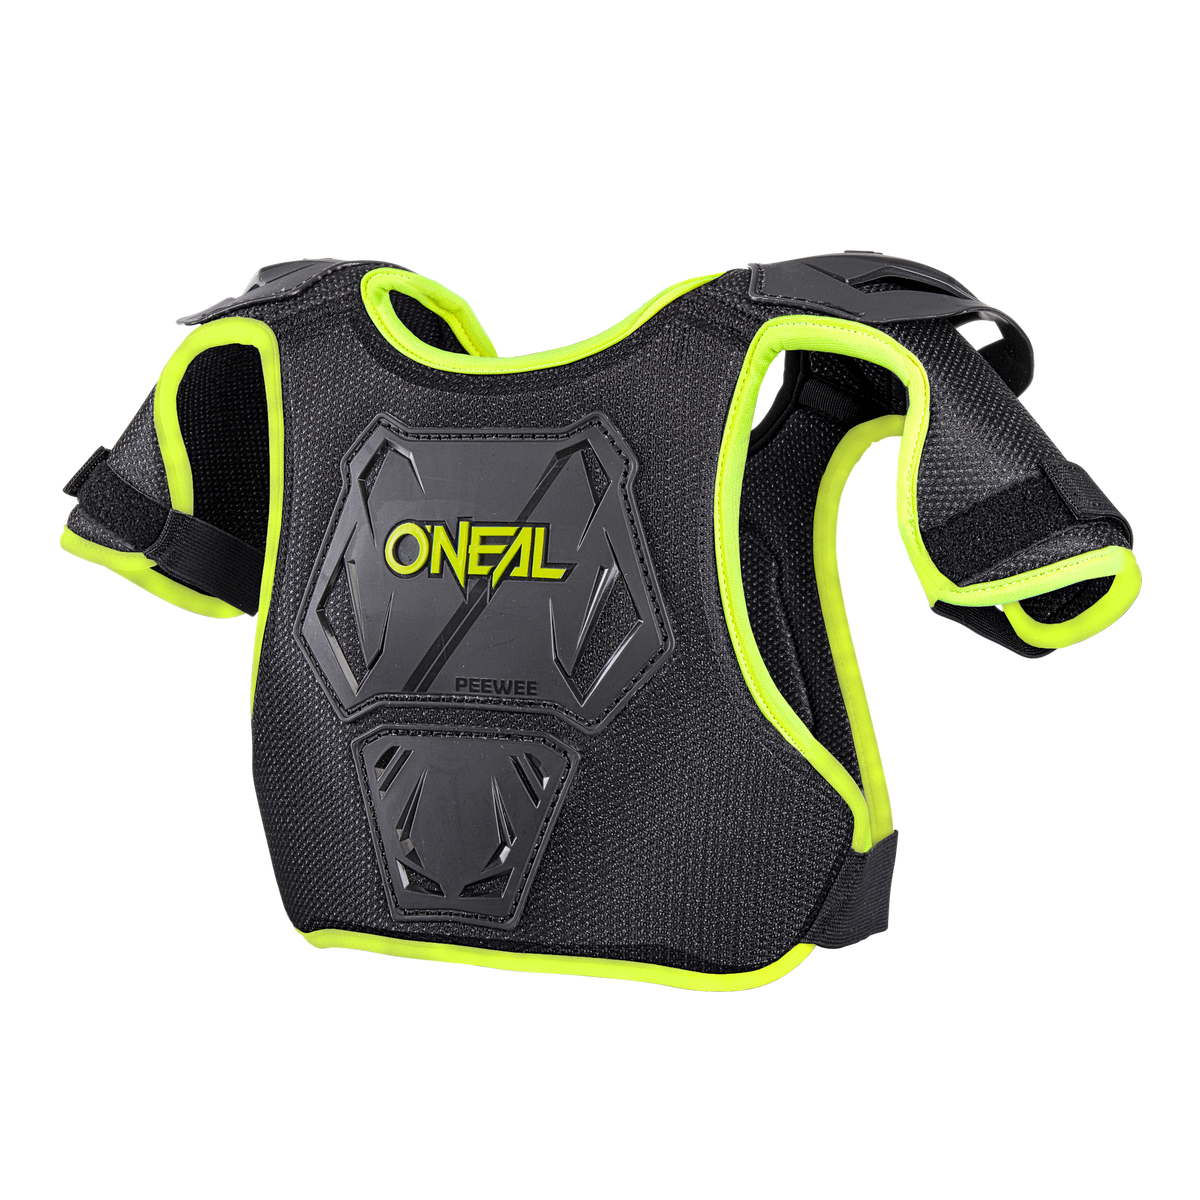 https://cdn.oneal.eu/assets/importedProductImages/PROTECTION/YOUTH/BODY%20ARMOUR/PEEWEE%20CHEST%20GUARD/neon%20yellow/2019_ONeal_PEEWEE_Chest_Guard_neon%20yellow_A2.png